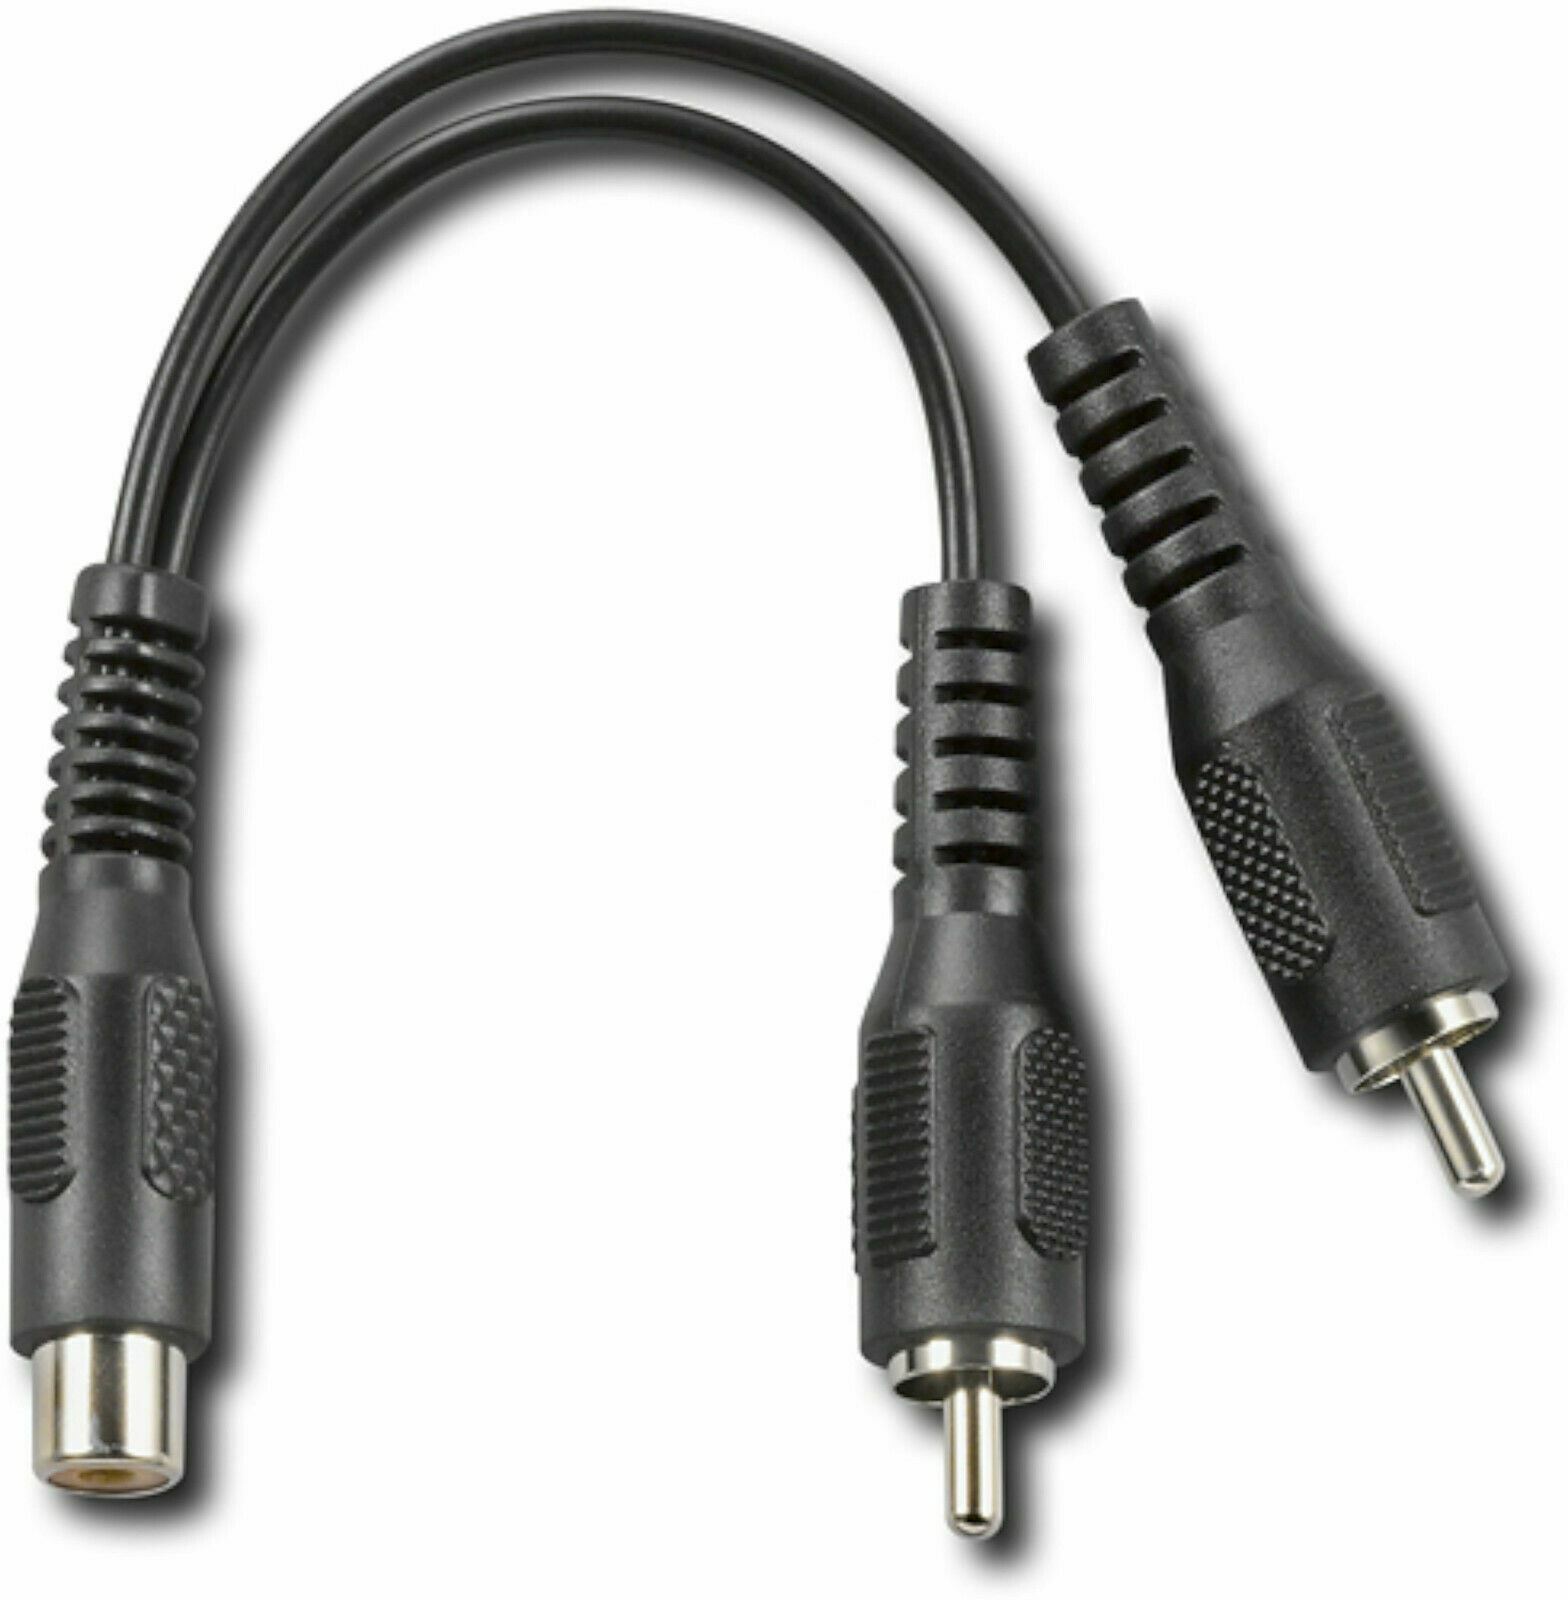 Dynex DX-AD115 RCA Y Audio Adapter Compatible Audio Components 2 Male 1 Female - $4.65